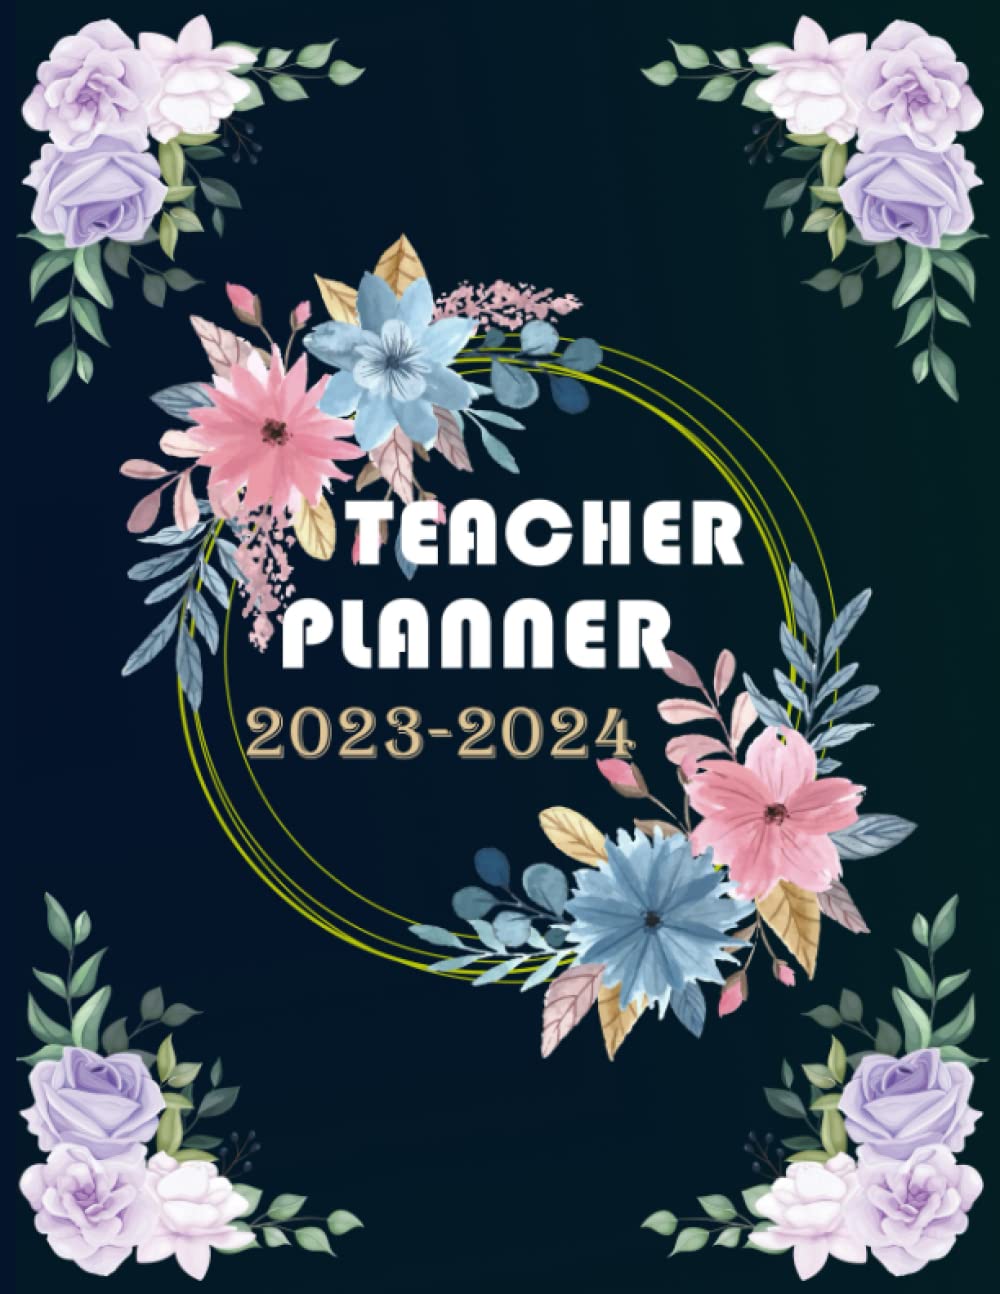 Teacher Planner 2023-2024: Weekly and Monthly Organizer and Grade Record Book for Teachers With Floral Cover, Large Lesson Plan Books, Academic Planner 2023-2024 Weekly And Monthly, Size 8.5x11 Inches